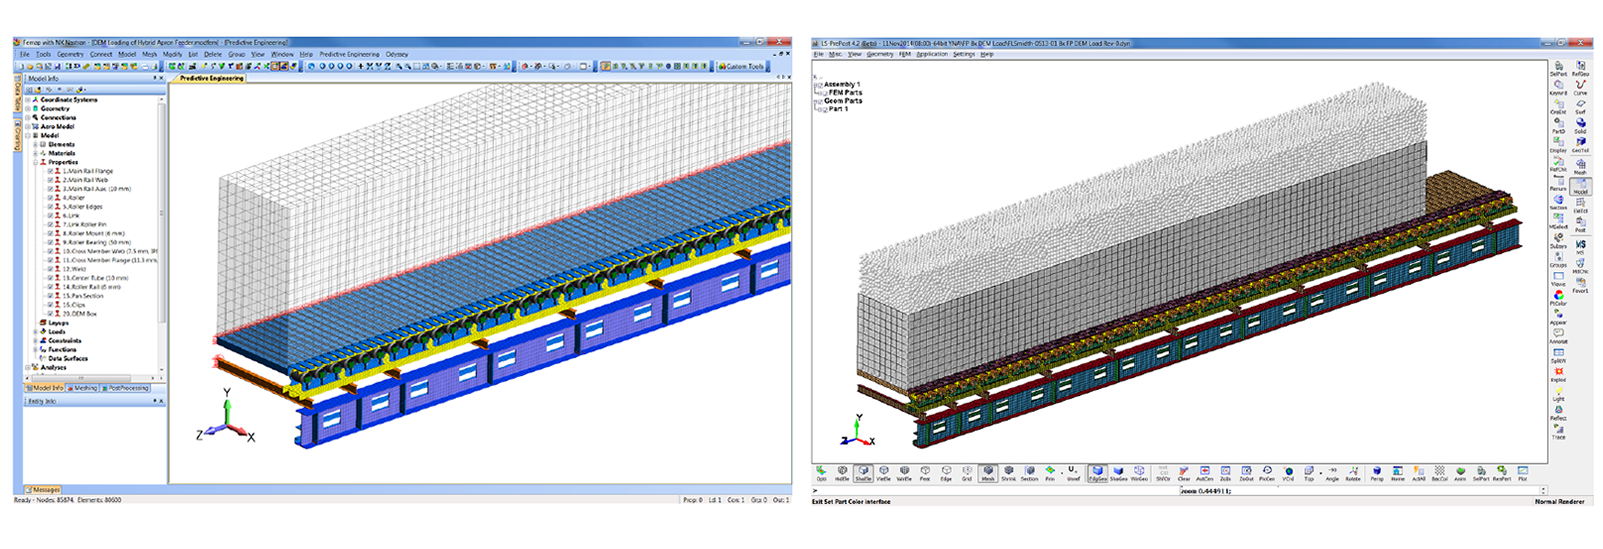 DEM particles were used to simulate the processed mineral cake onto conveyer belt feeder with a knife gate at the far end.  The model was built in Femap and then exported to LSPP for the addition of the DEM elements.